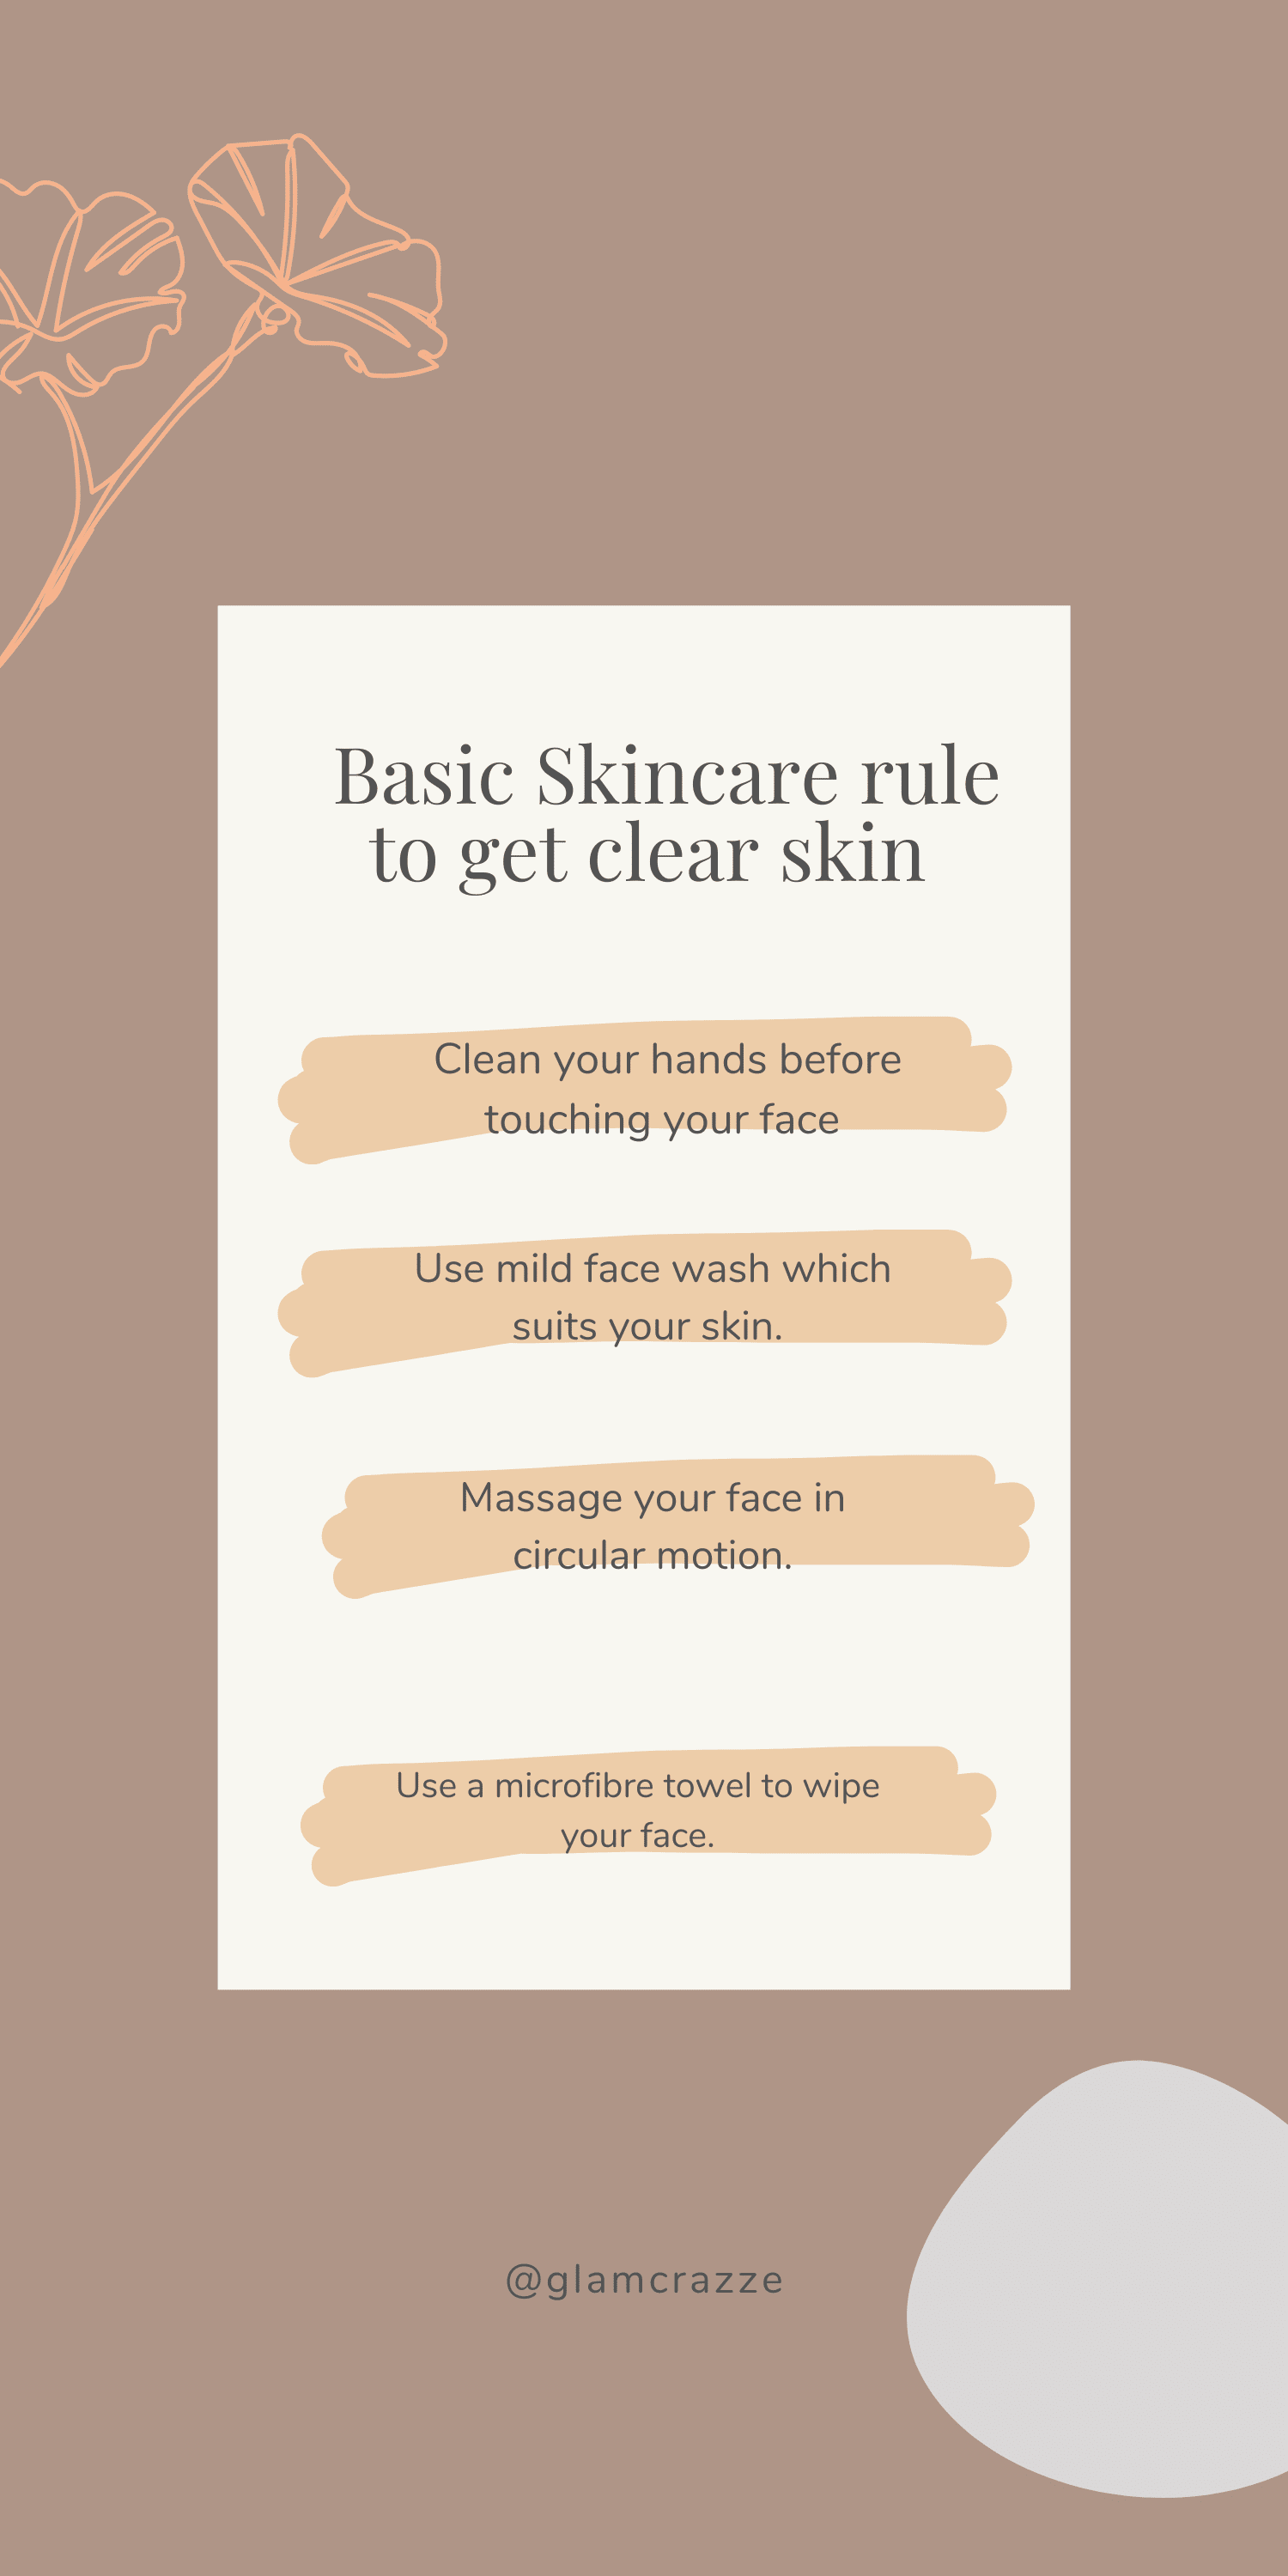 60 second skincare rule to get clear skin